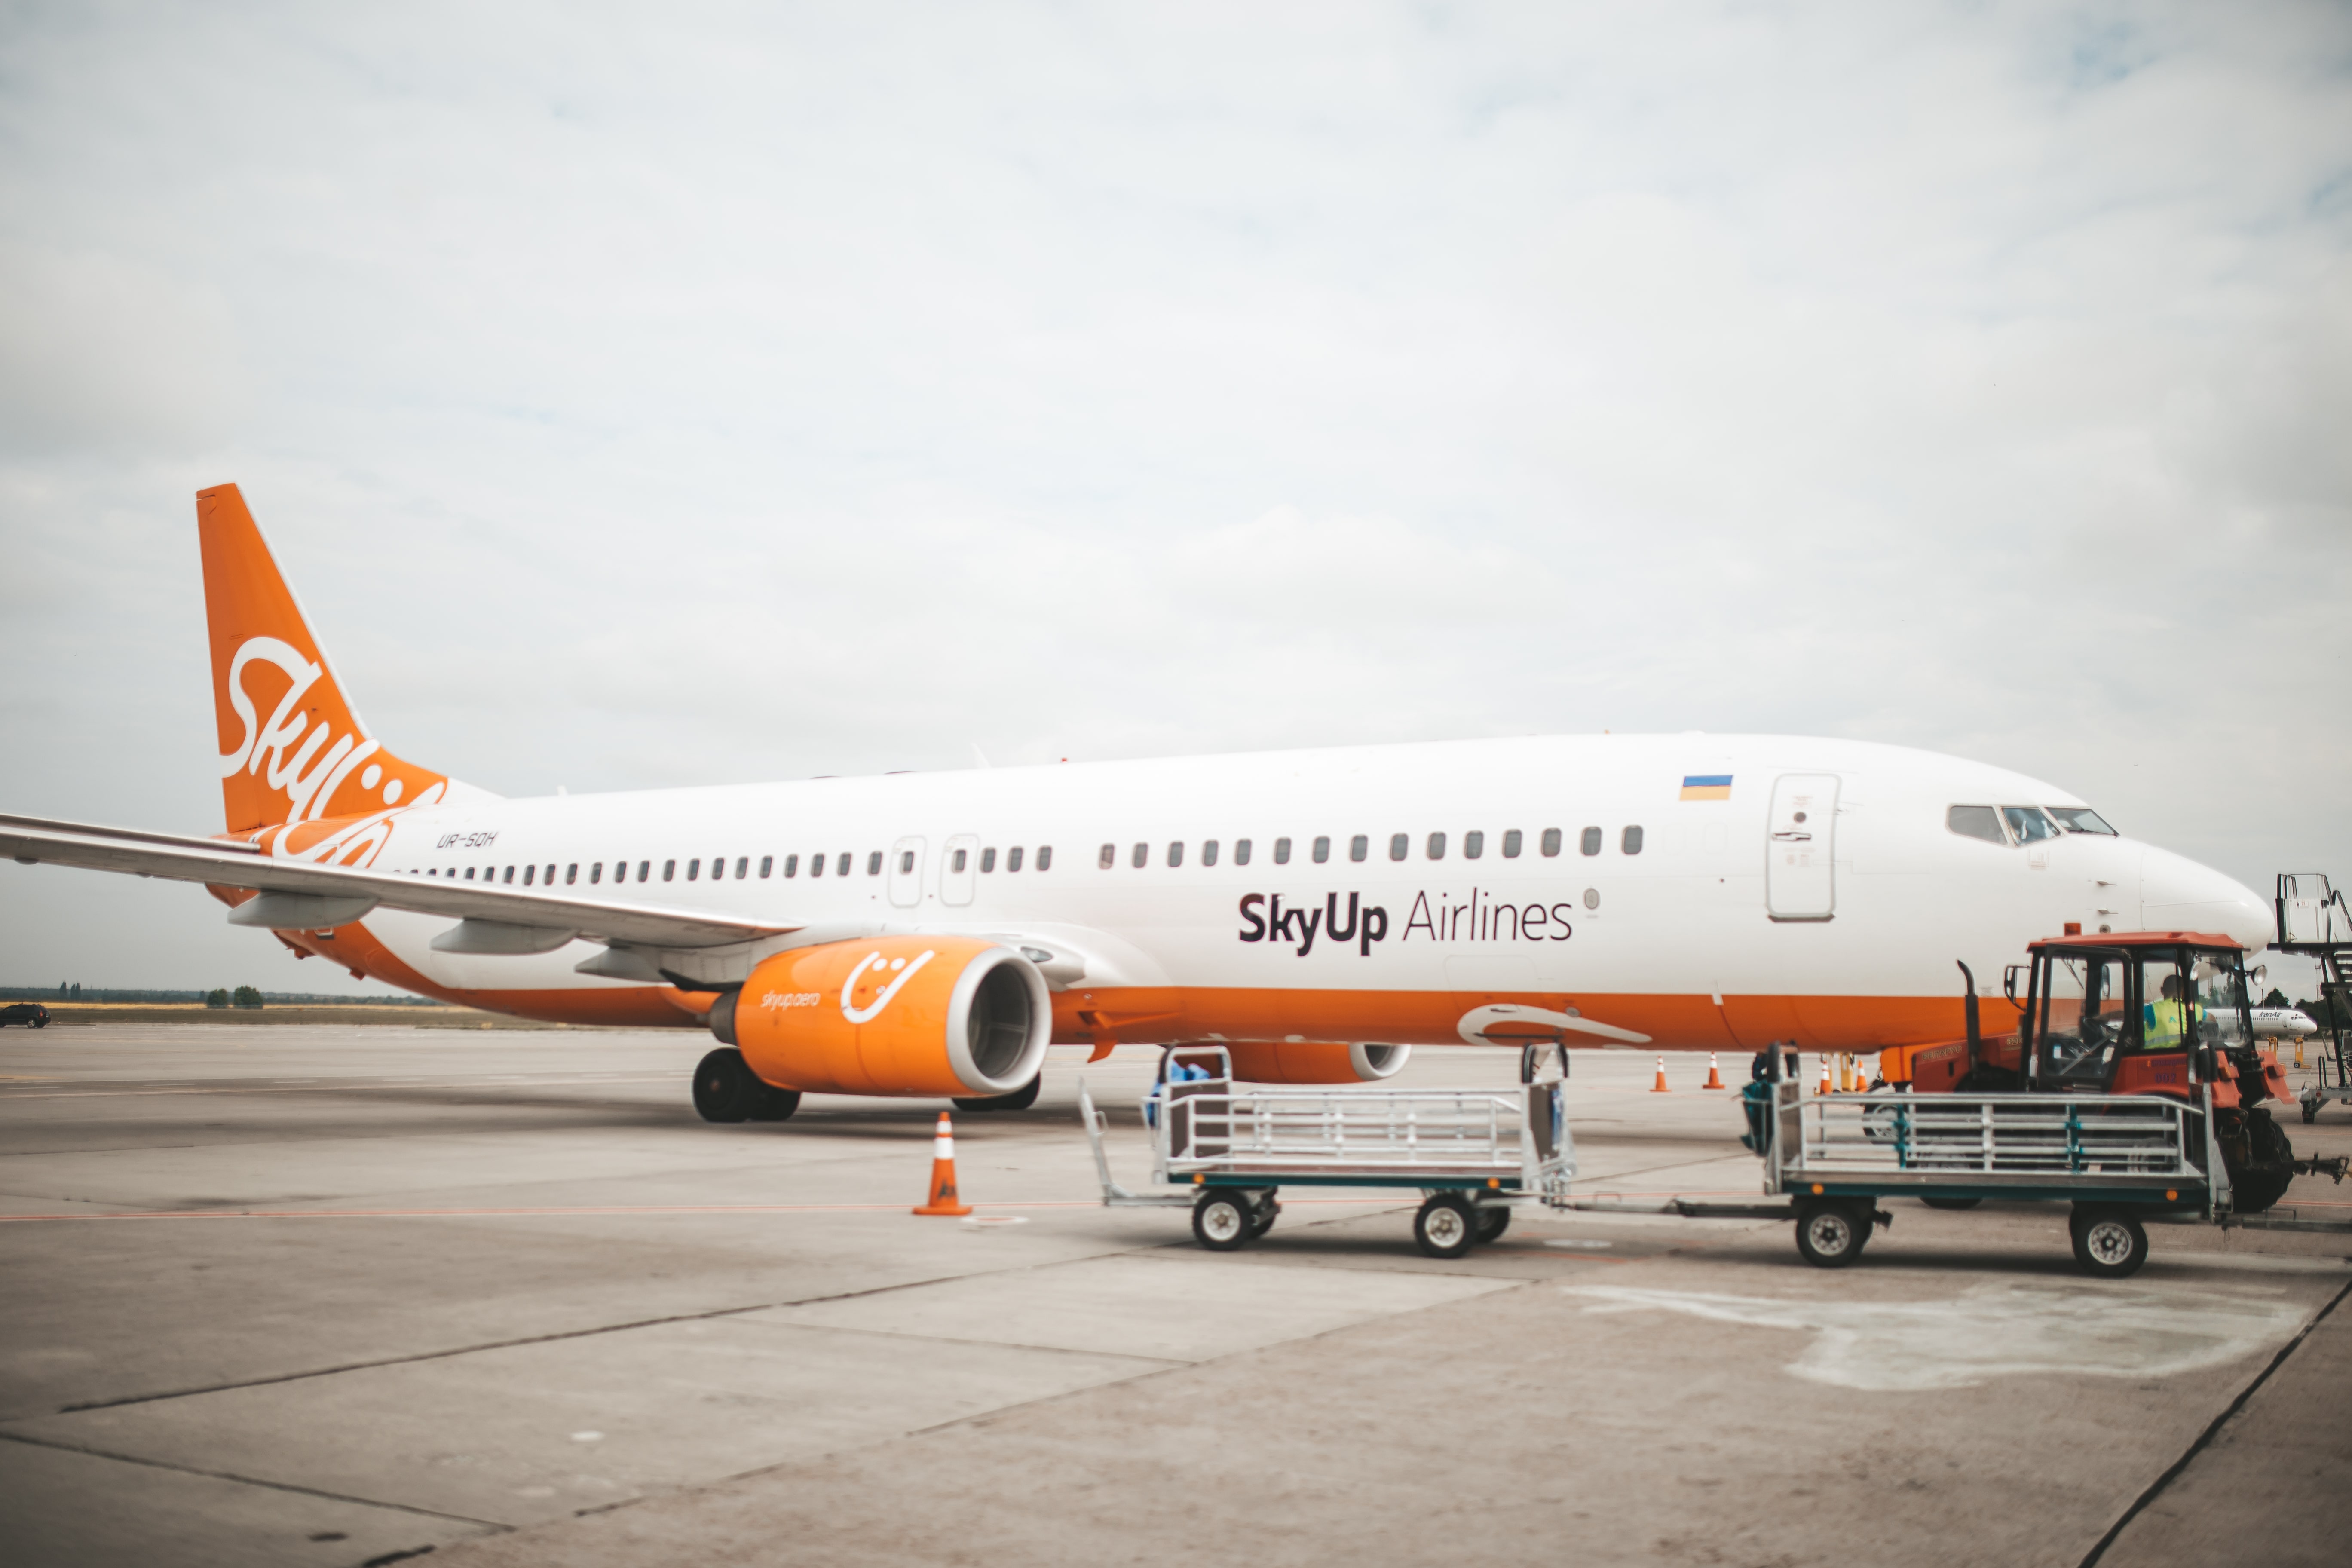 "It would be untrue to say that an airport in Ukraine is possible as soon as tomorrow," - Oleksandr Shafiev, a top manager at SkyUp Airlines.